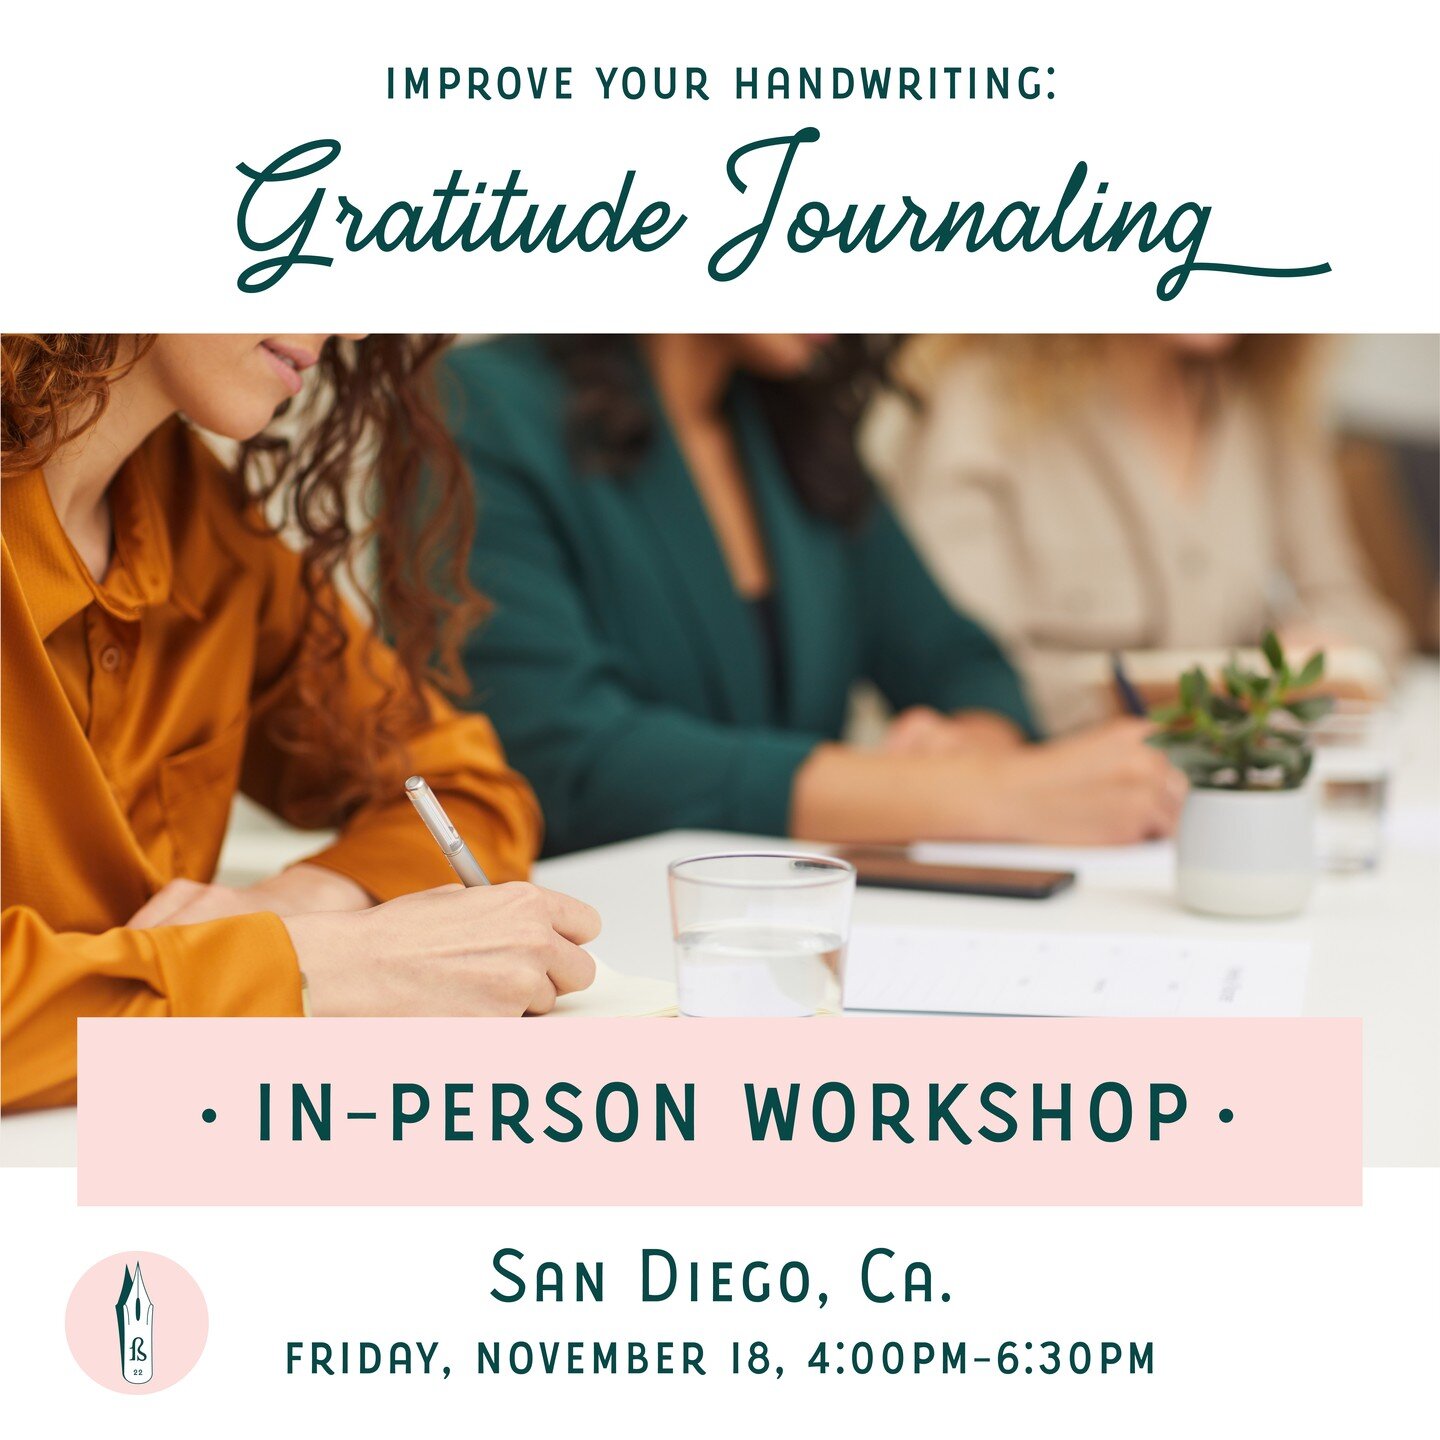 We&rsquo;re delighted to announce our first-ever Gratitude Journaling workshop! This unique offering combines the art of handwriting and gratitude journaling, November is a month to be grateful for all the good things in our life, and we invite you t